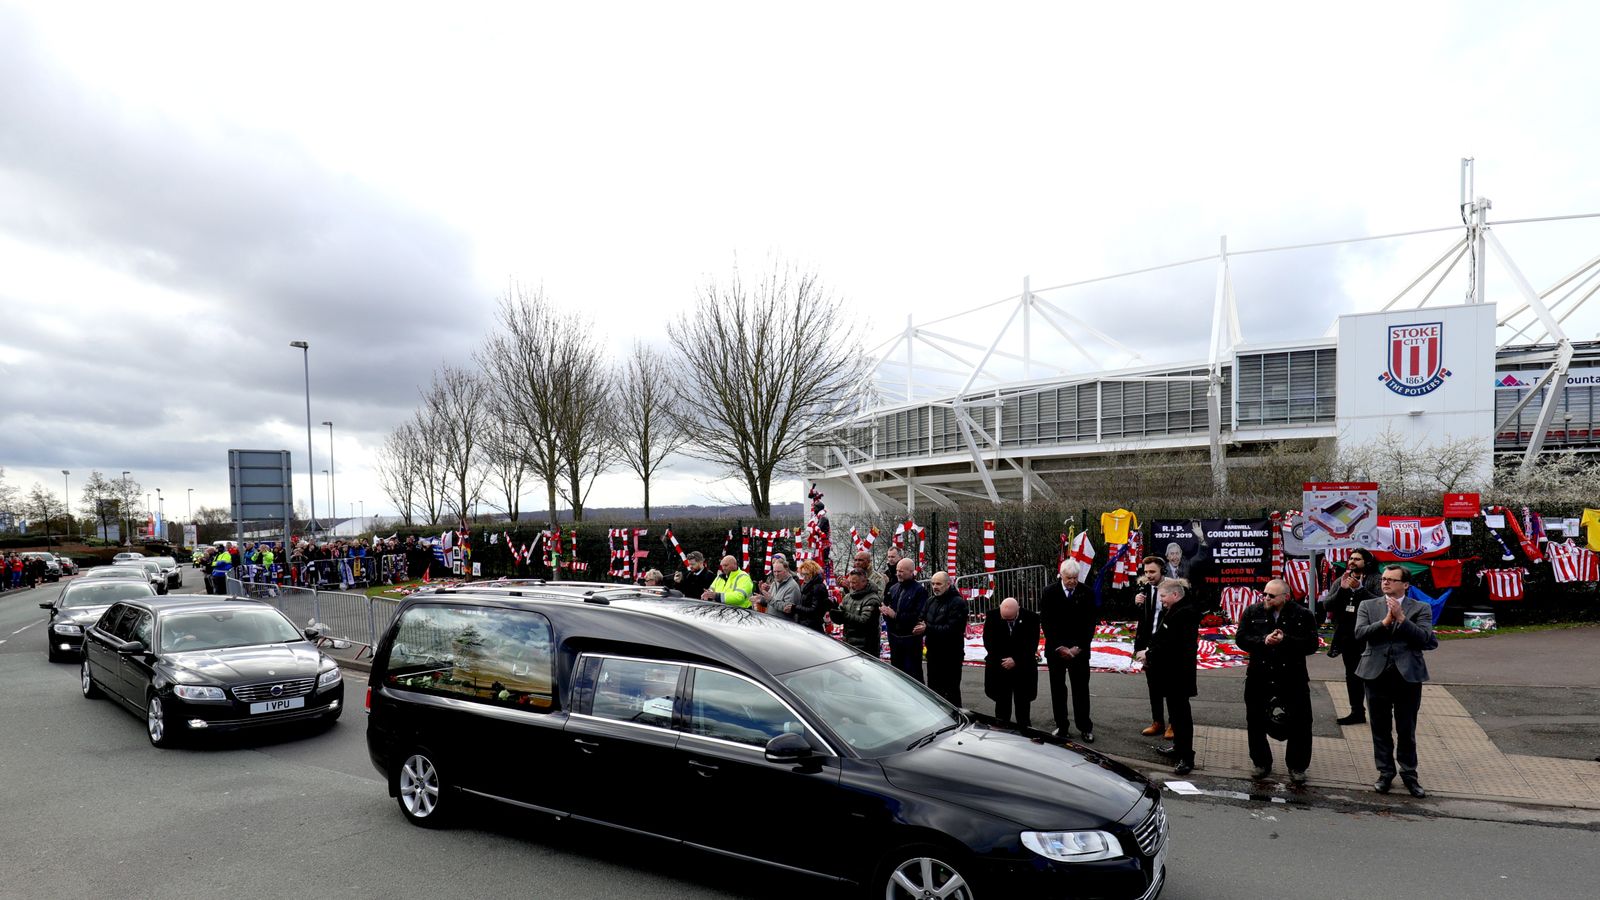 Gordon Banks' funeral takes place at Stoke Minster | Football News ...